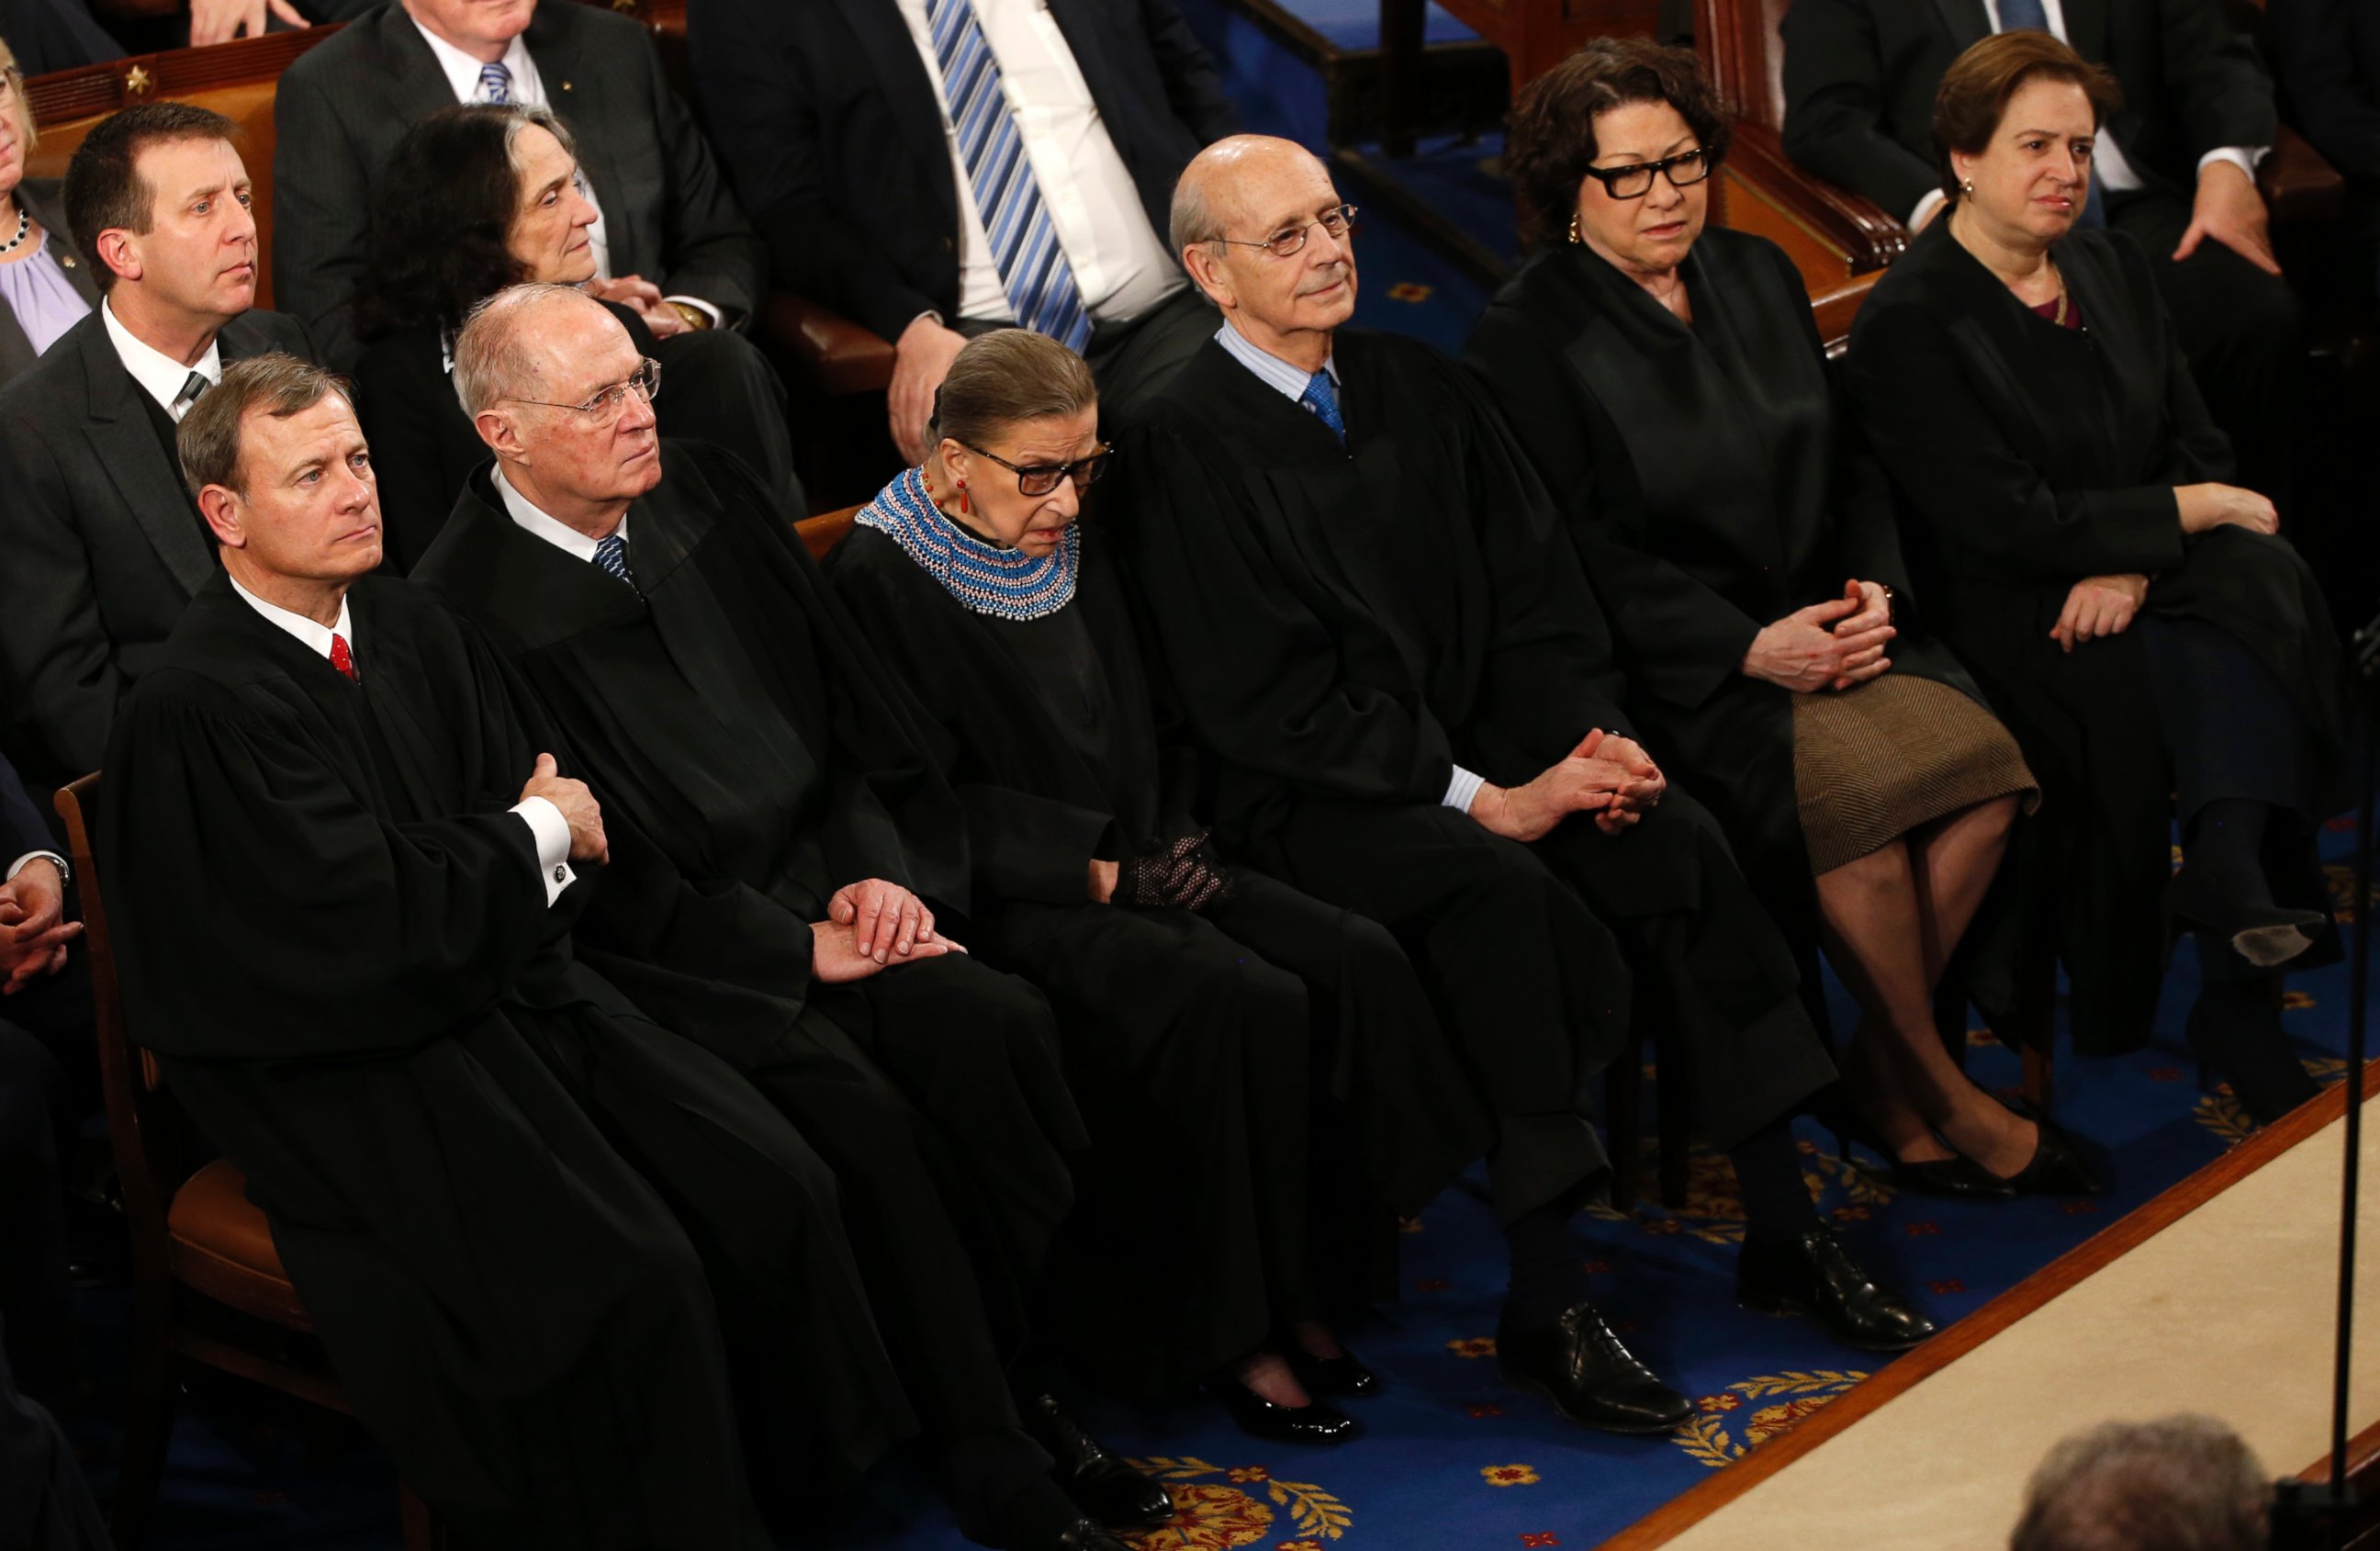 PHOTO: John Roberts, Anthony Kennedy, Ruth Bader Ginsburg, Stephen Breyer, Elena Kagan and Sonya Sotomayor listen to President Barack Obama as he delivers his State of the Union address in Washington, Jan. 20, 2015.